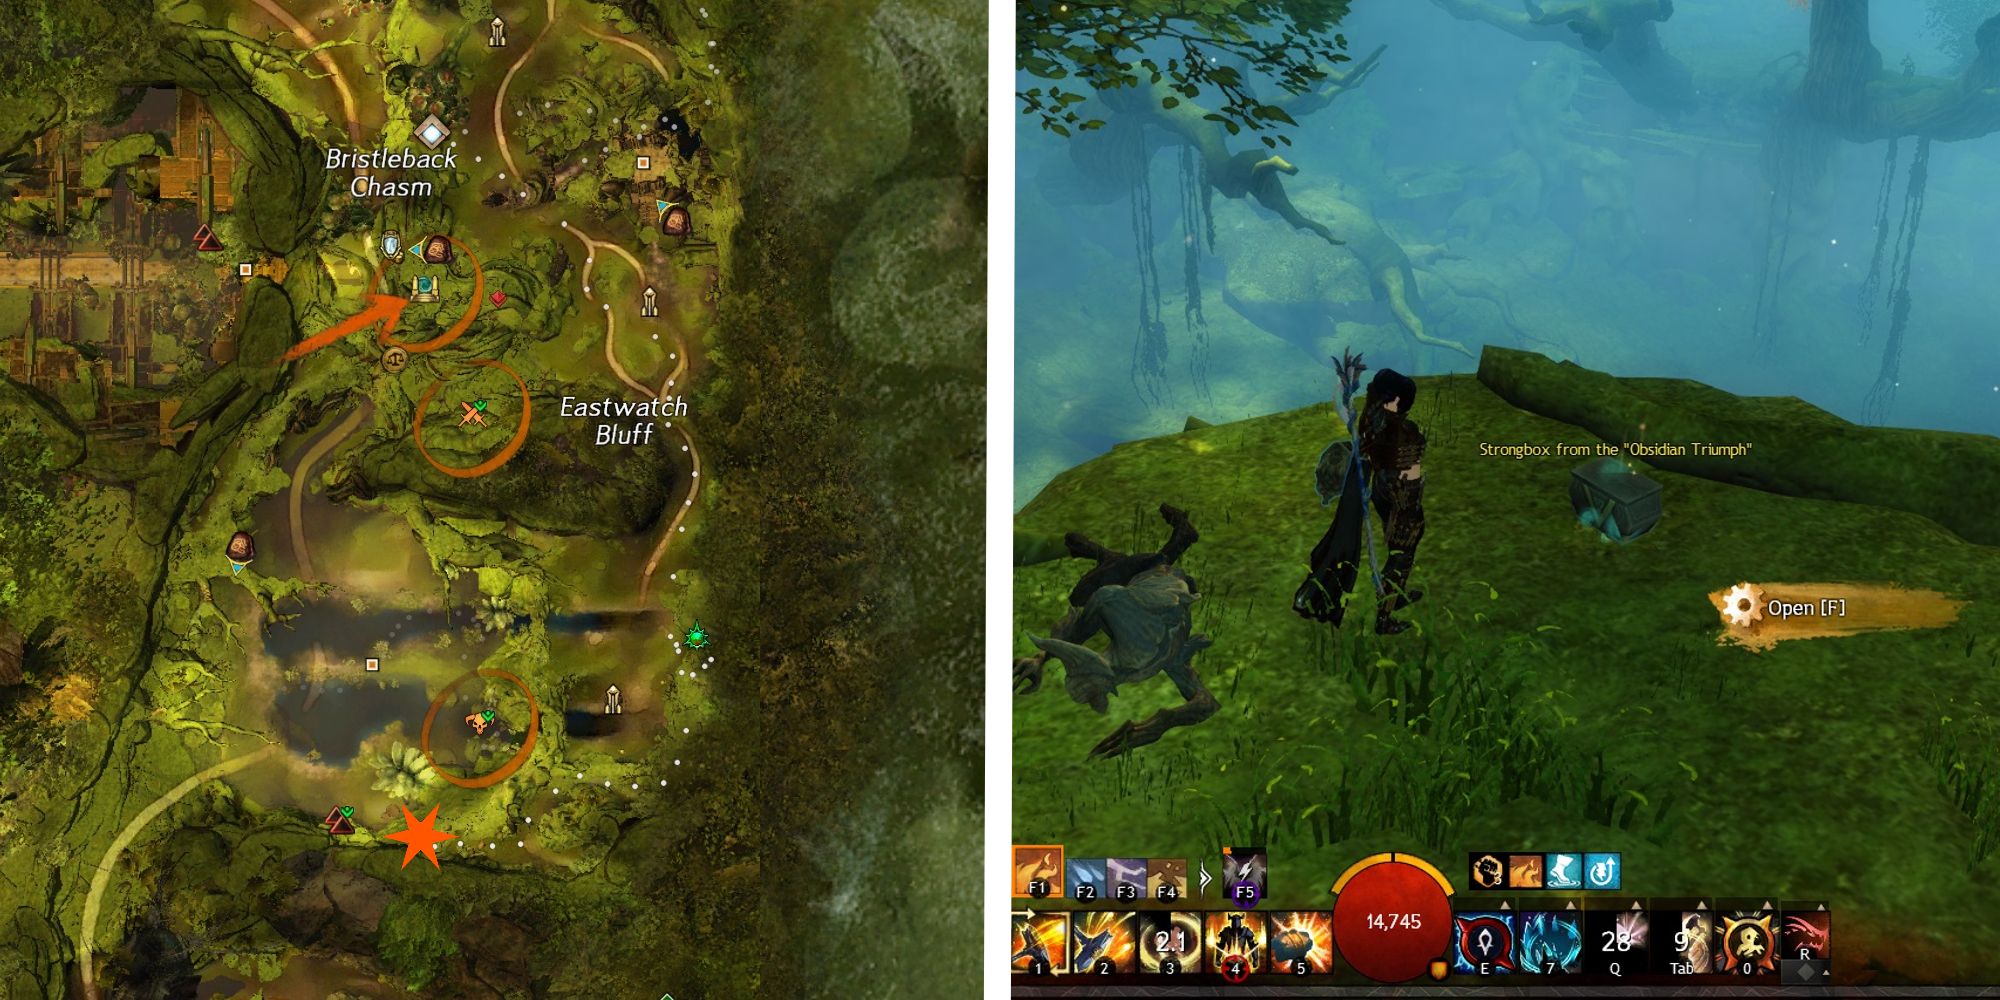 obsidian triumph strongbox marked on map next to image of player standing at box